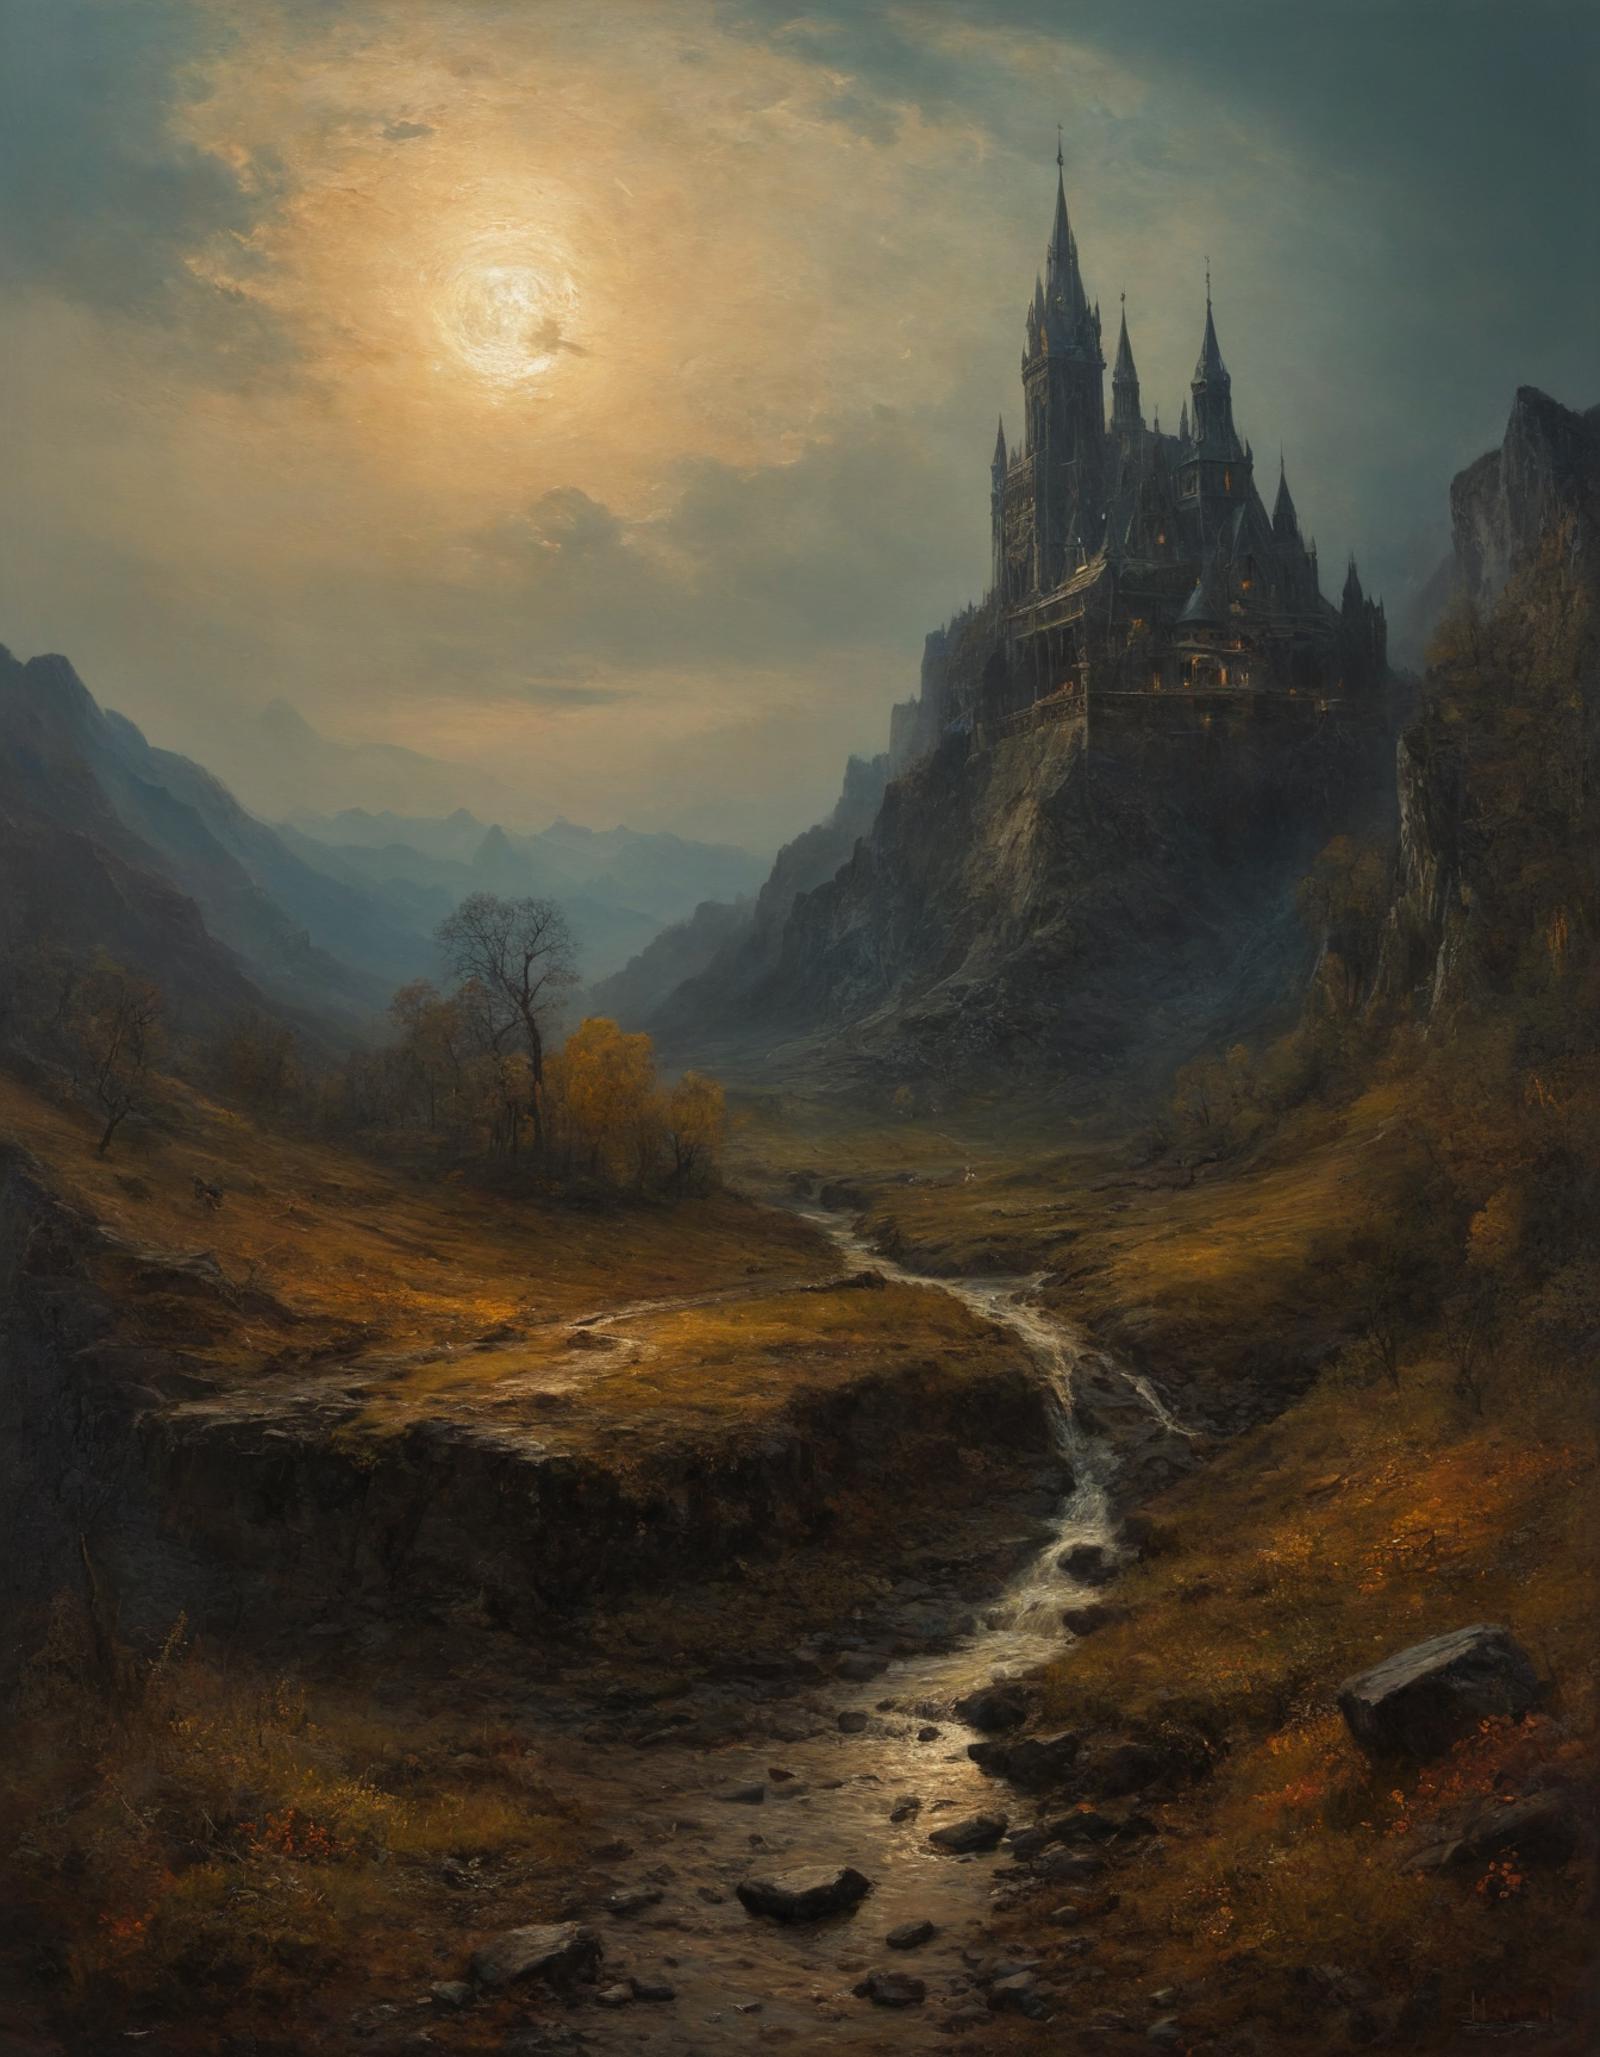 A painting of a castle near a mountain and a river at sunset.